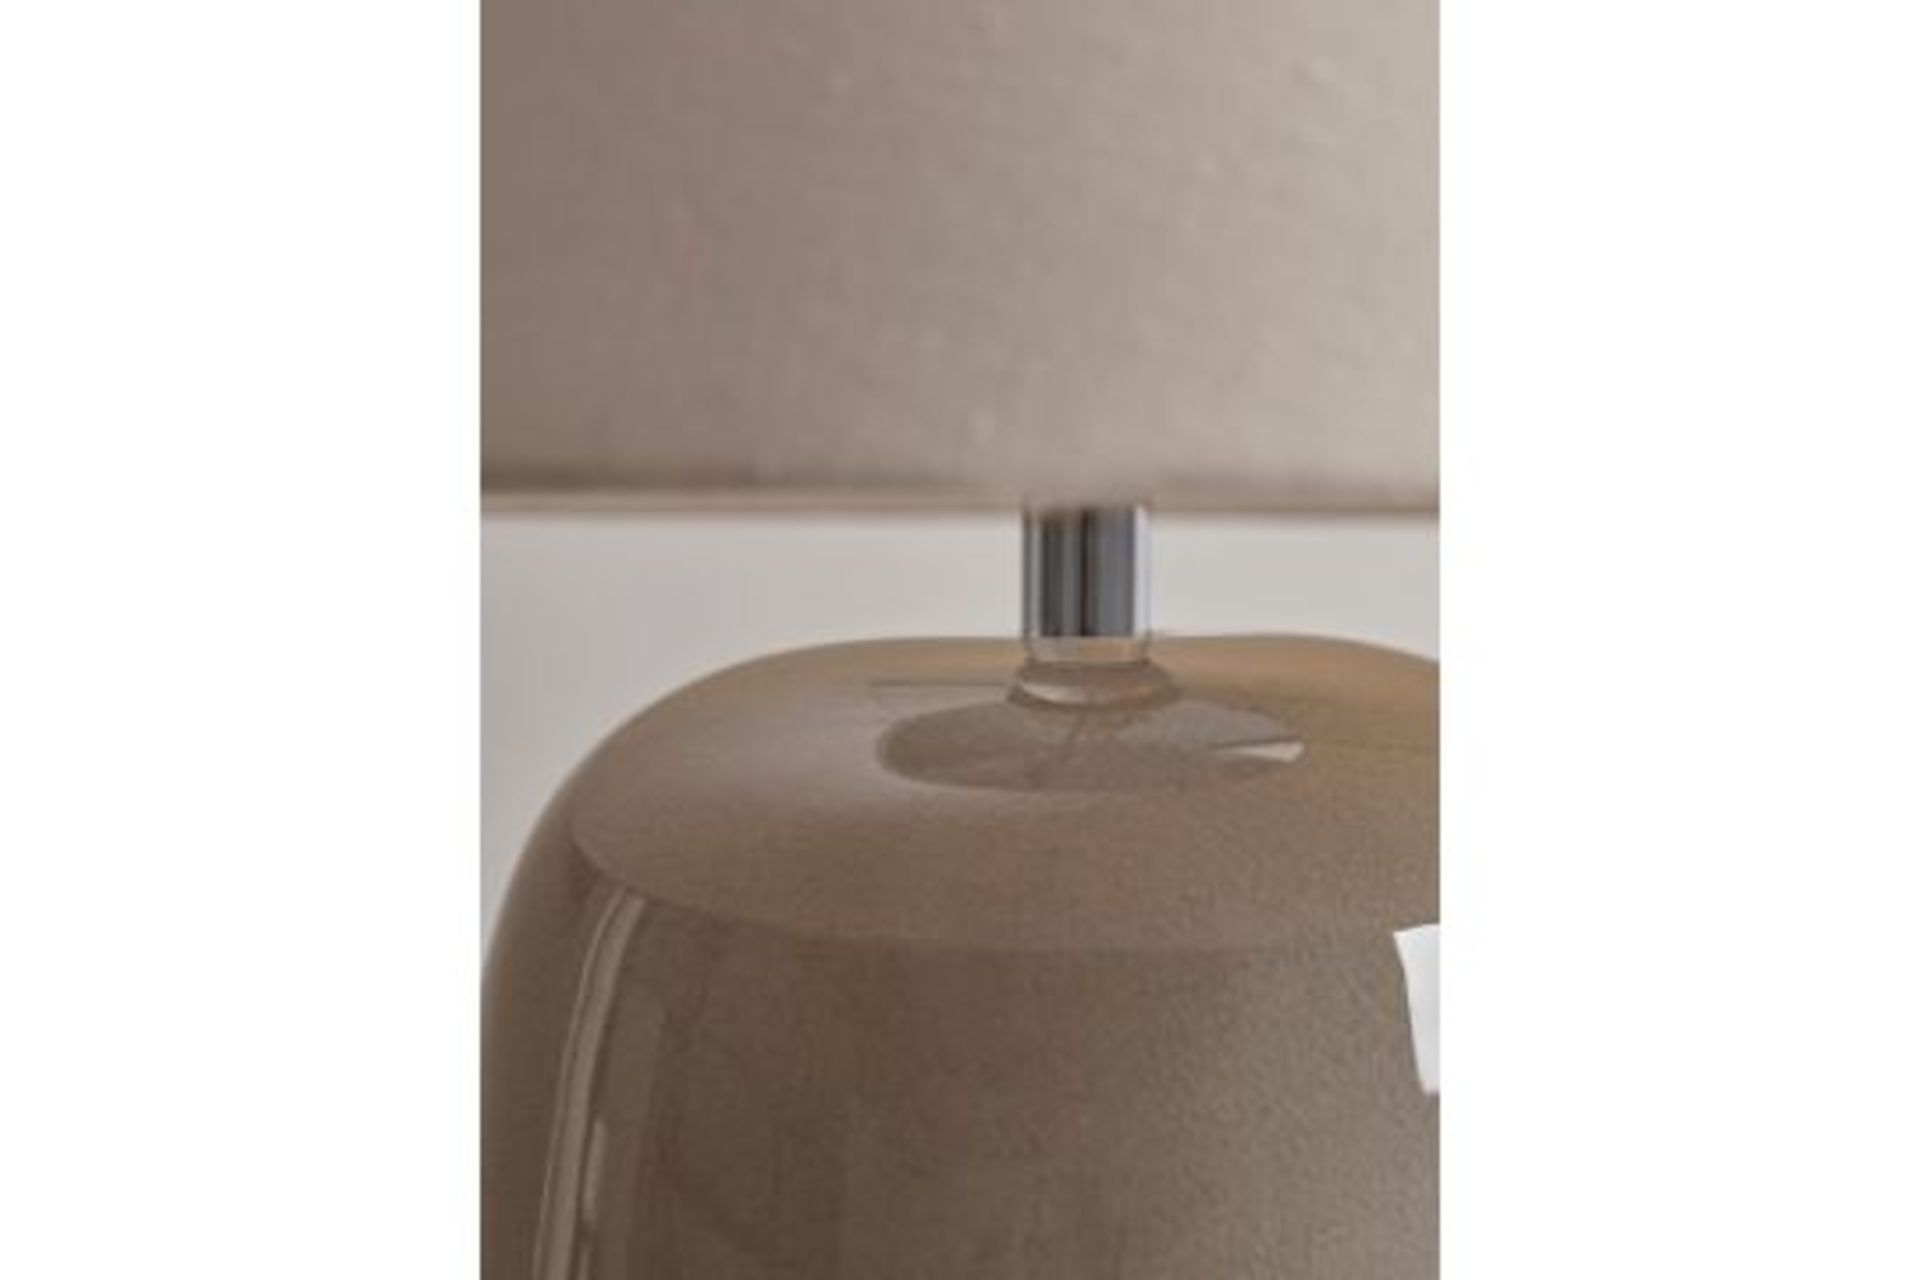 RRP £125 - Taupe Crackle Glaze Table Lamp (Crack On Lamp) - Image 4 of 7